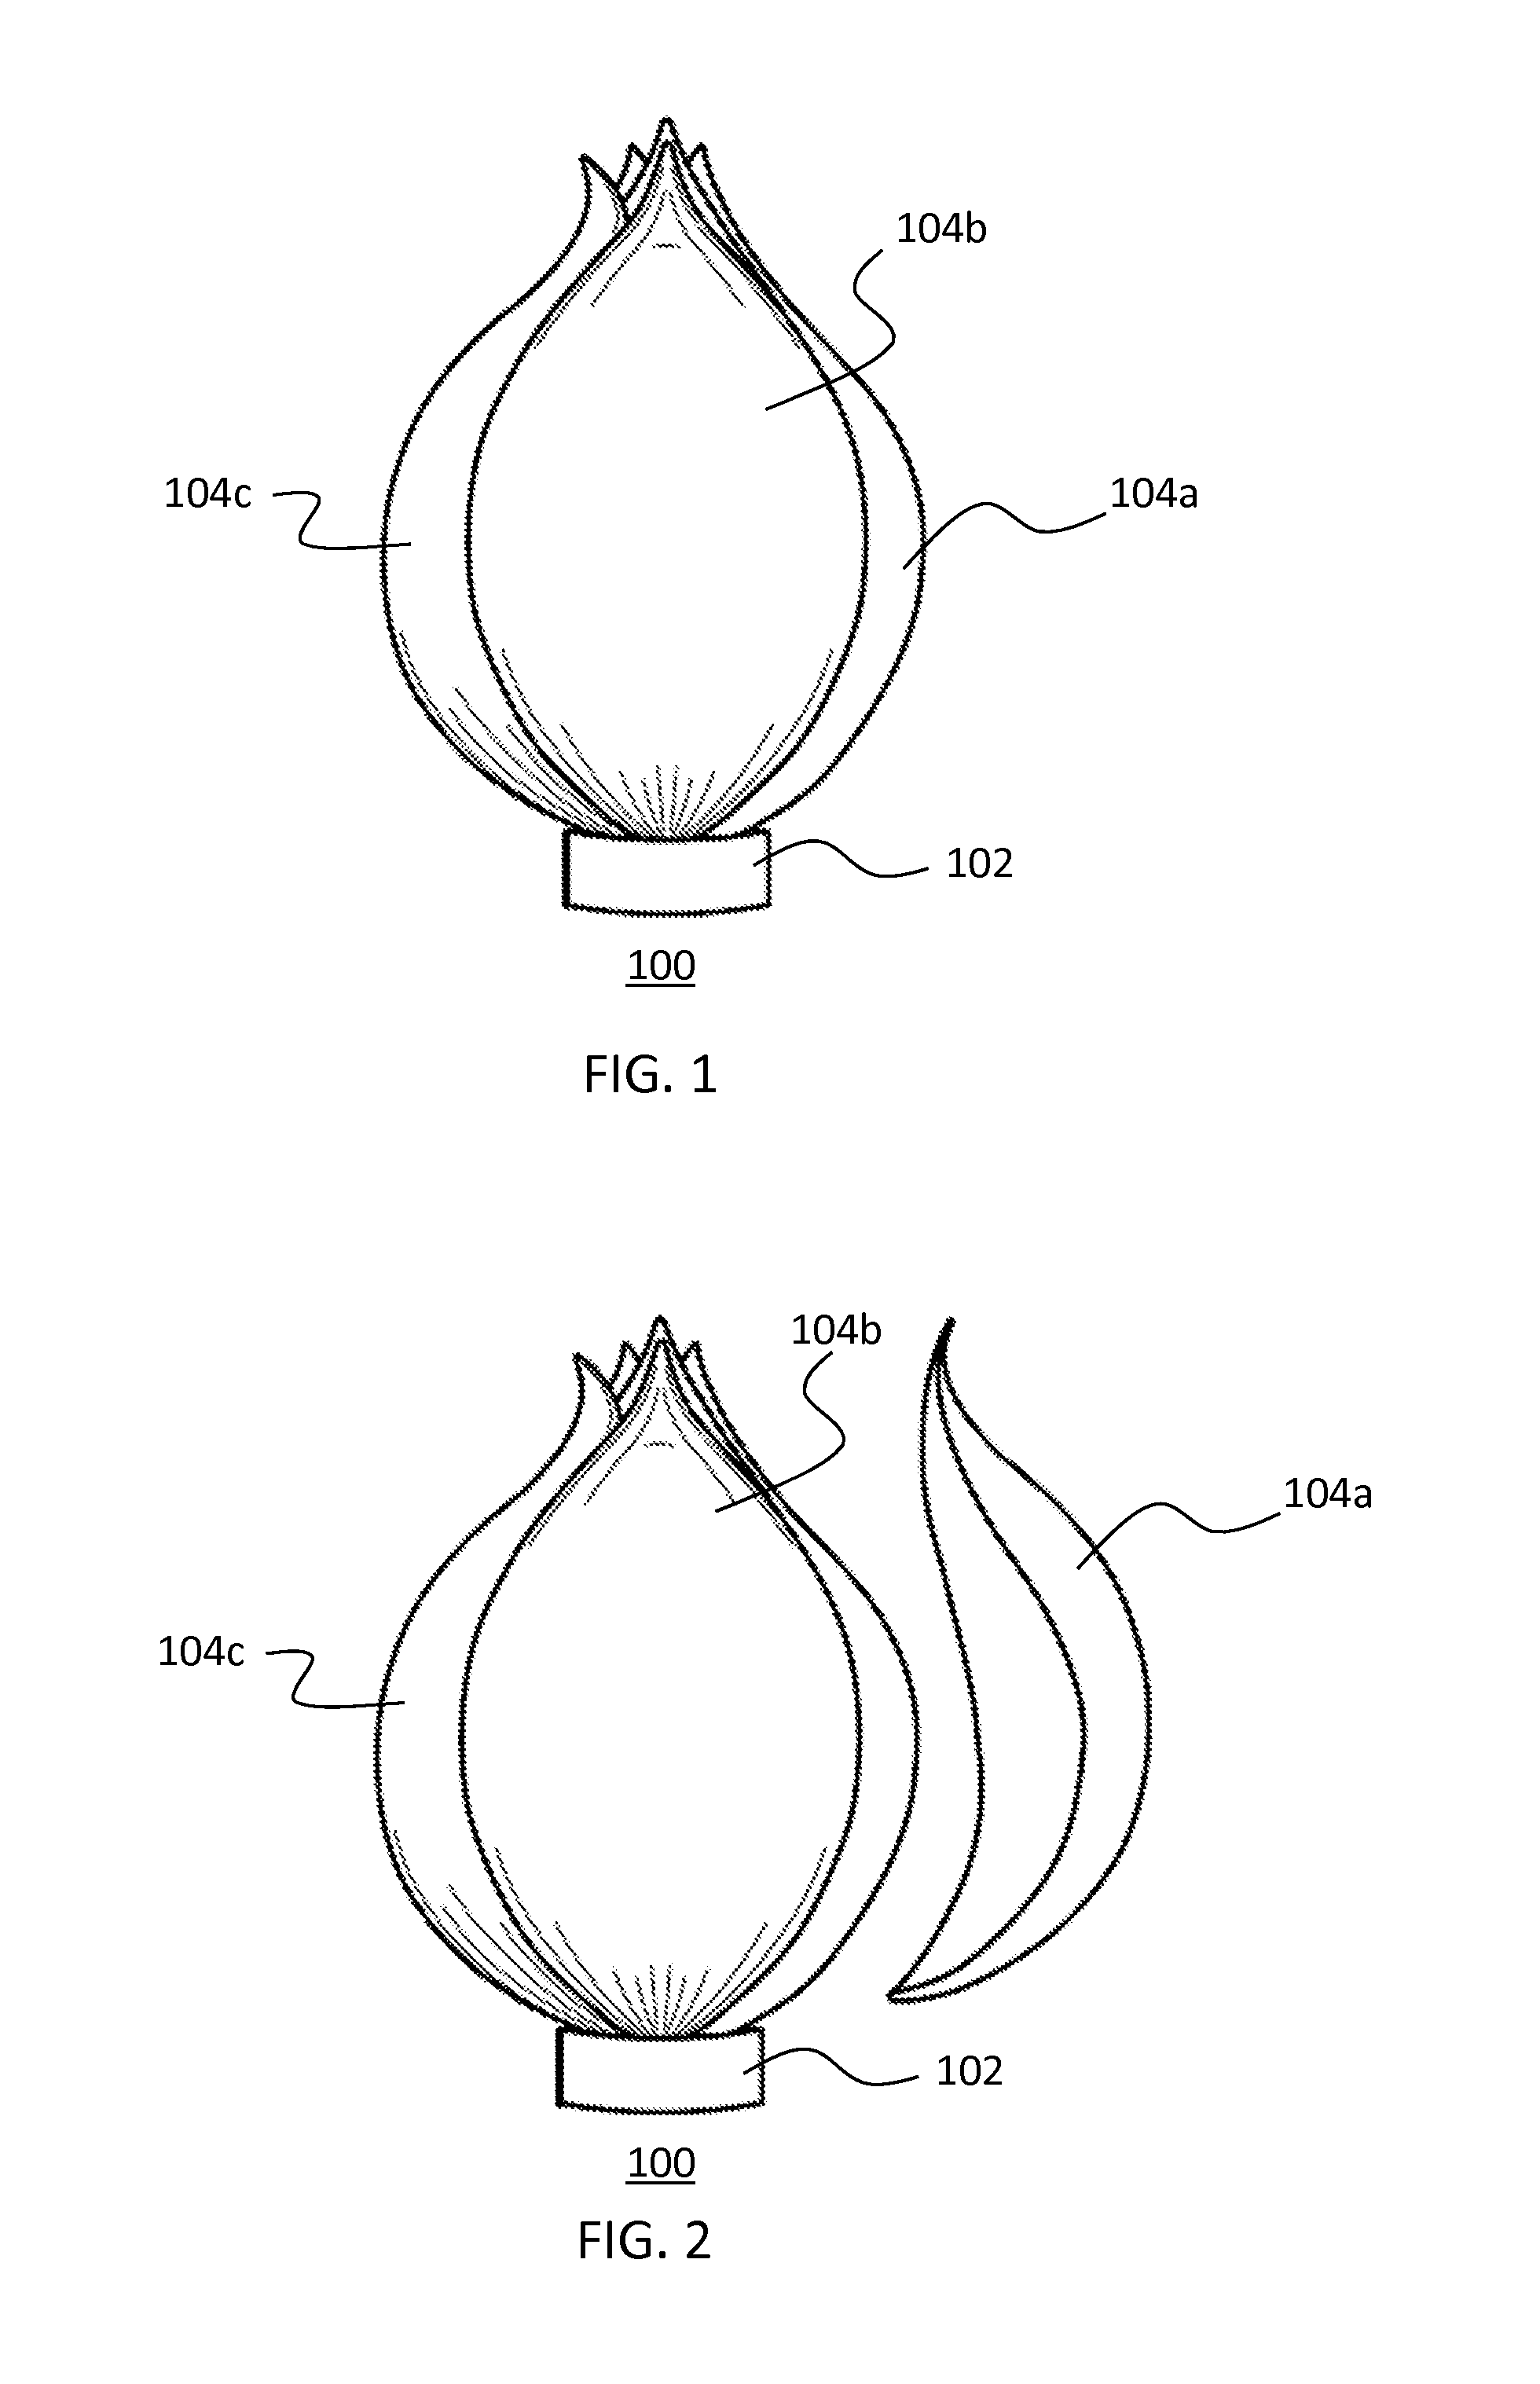 Self-exploration therapeutic assembly and method of use